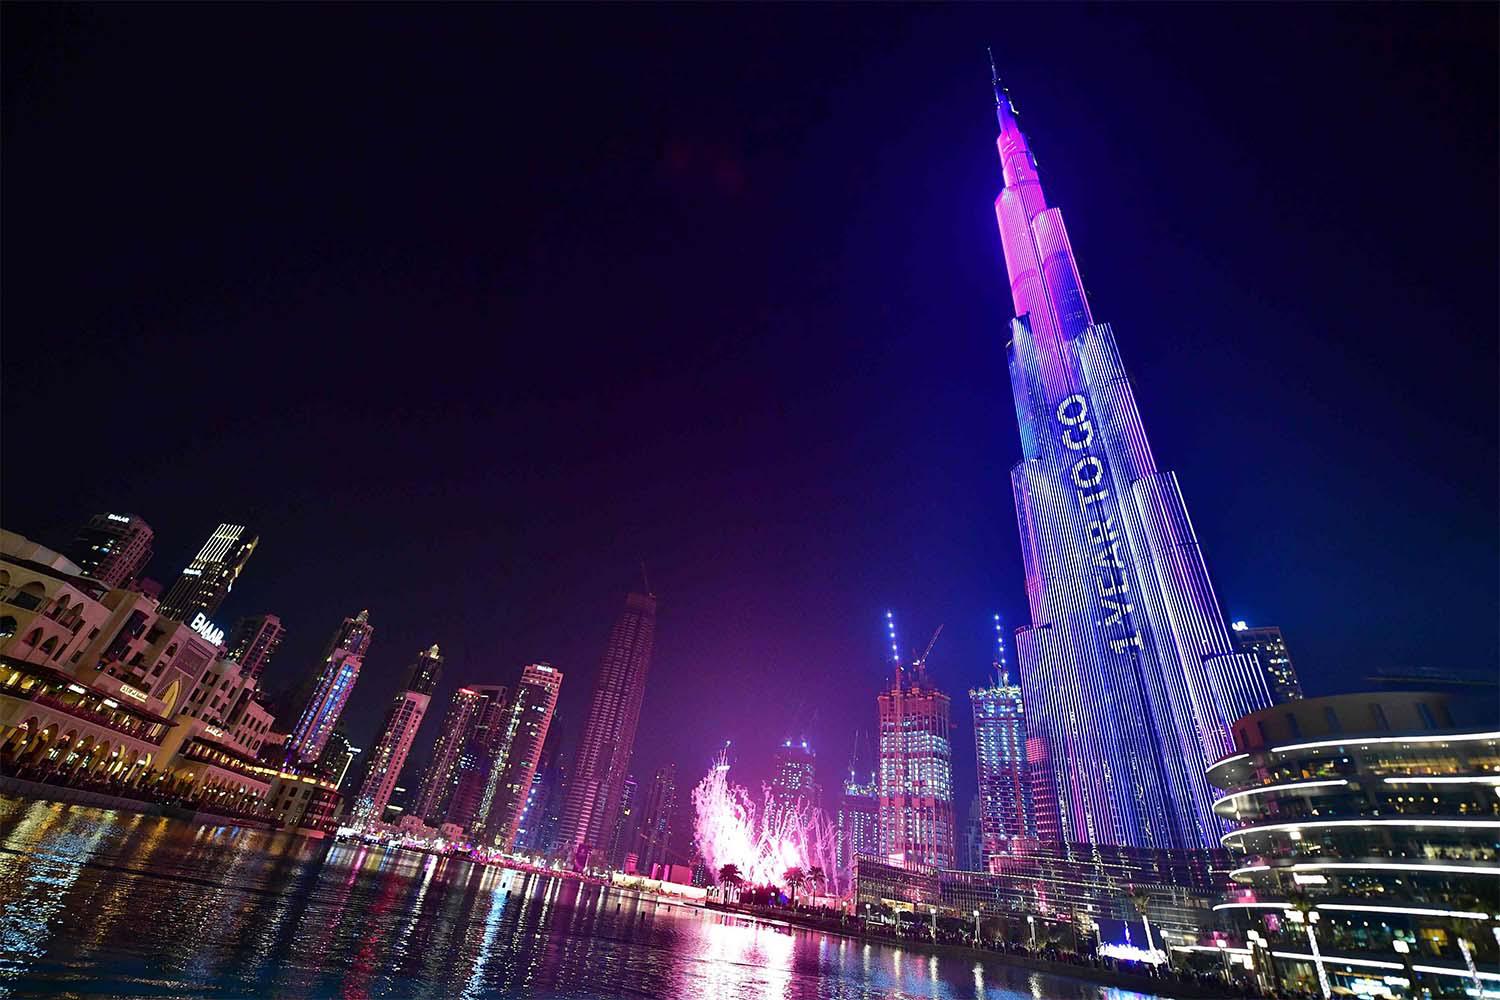 Dubai's Burj Khalifa, the world's tallest building is illuminated during festivities marking the one-year countdown to Expo 2020